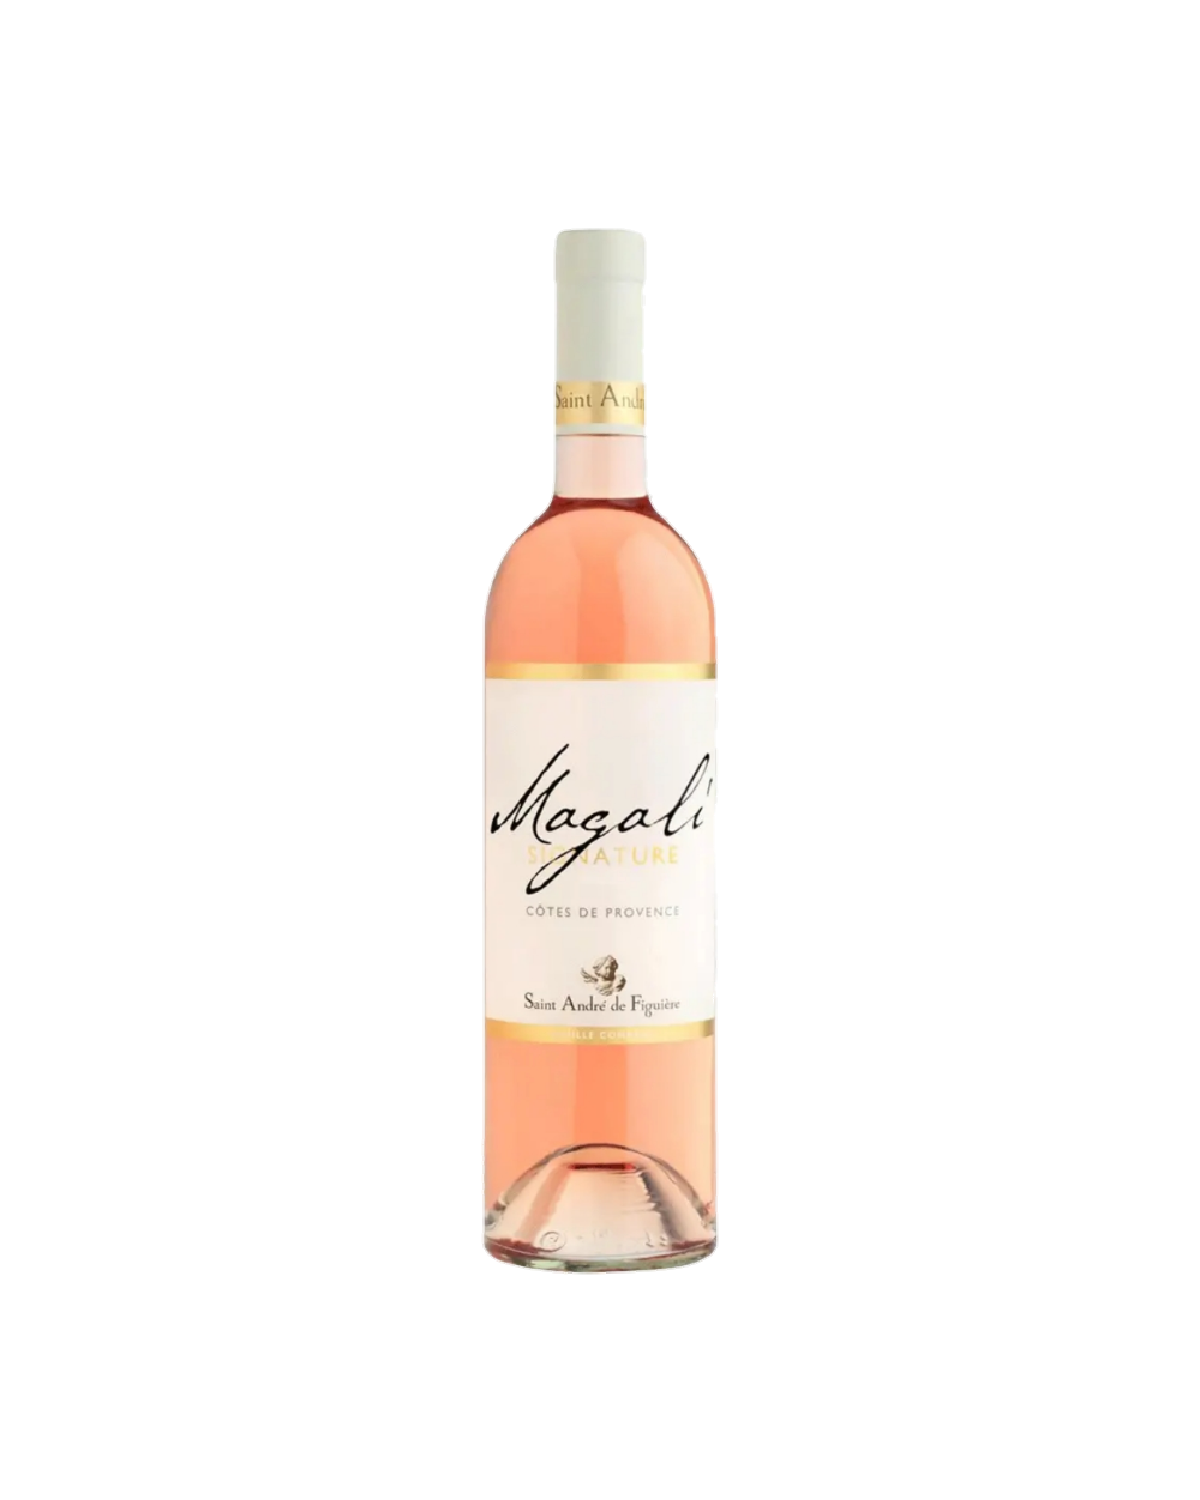 Figuiere Magali Rose